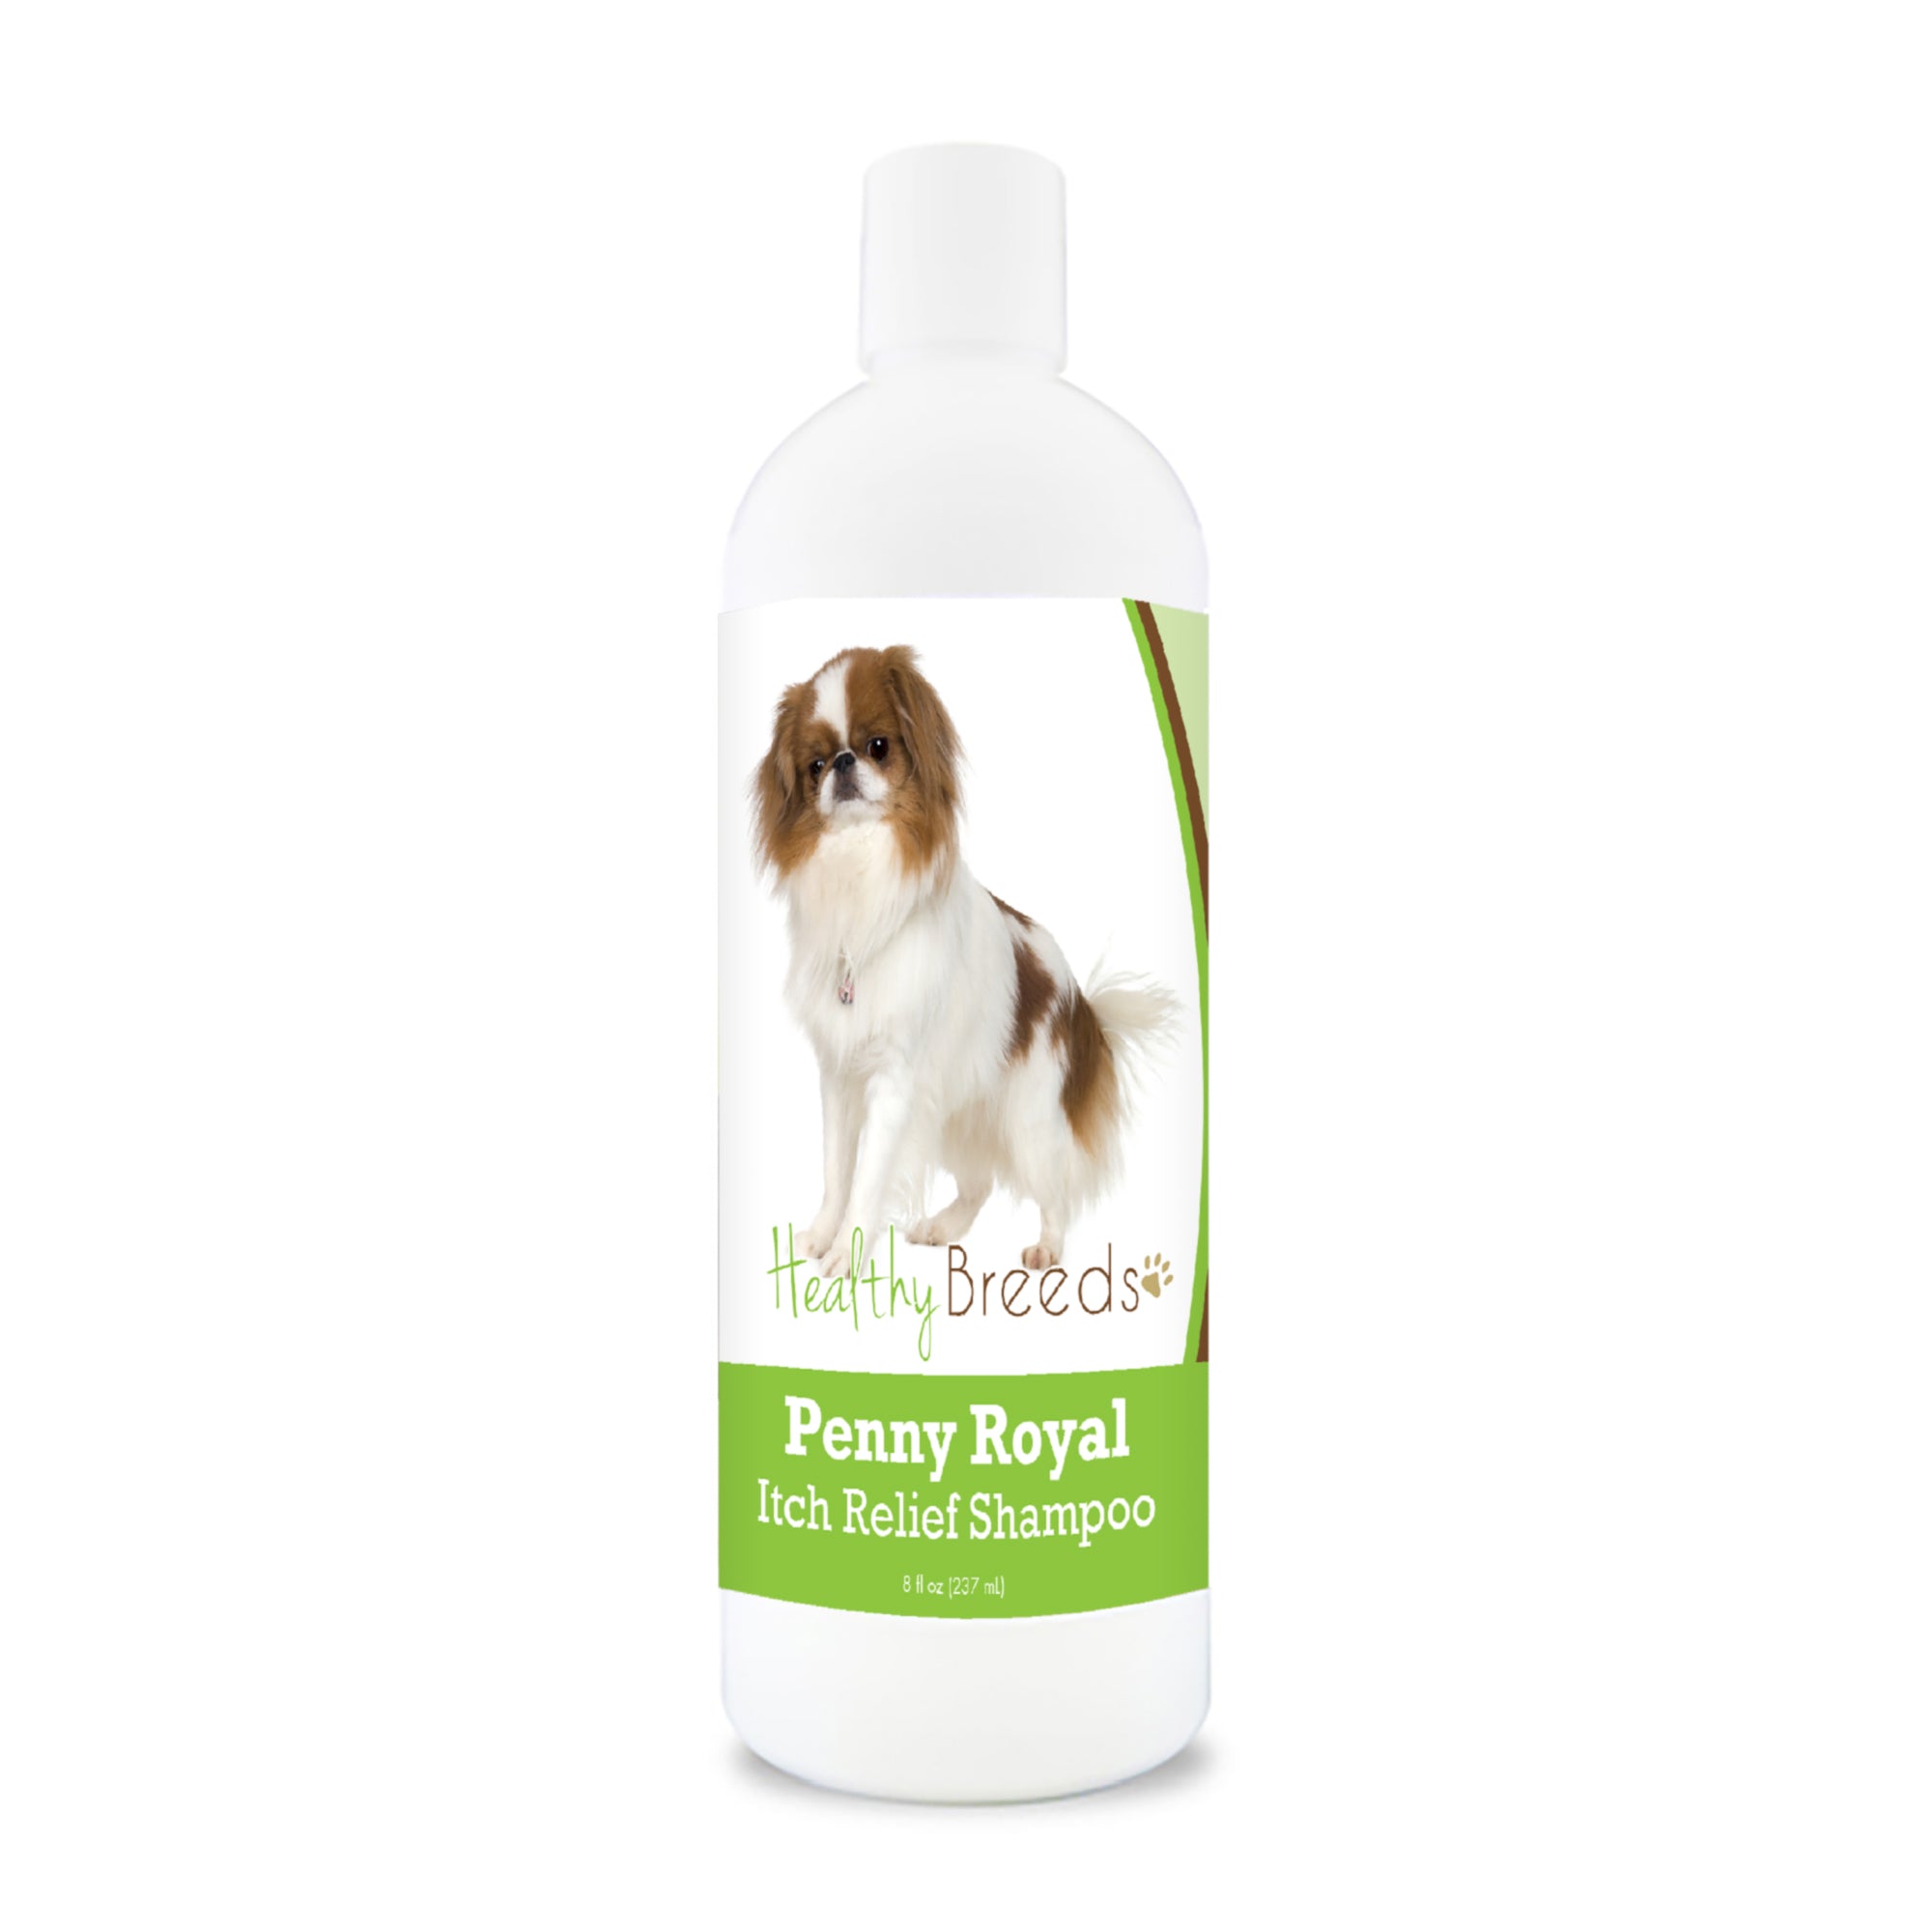 Japanese Chin Penny Royal Itch Relief Shampoo 8 oz